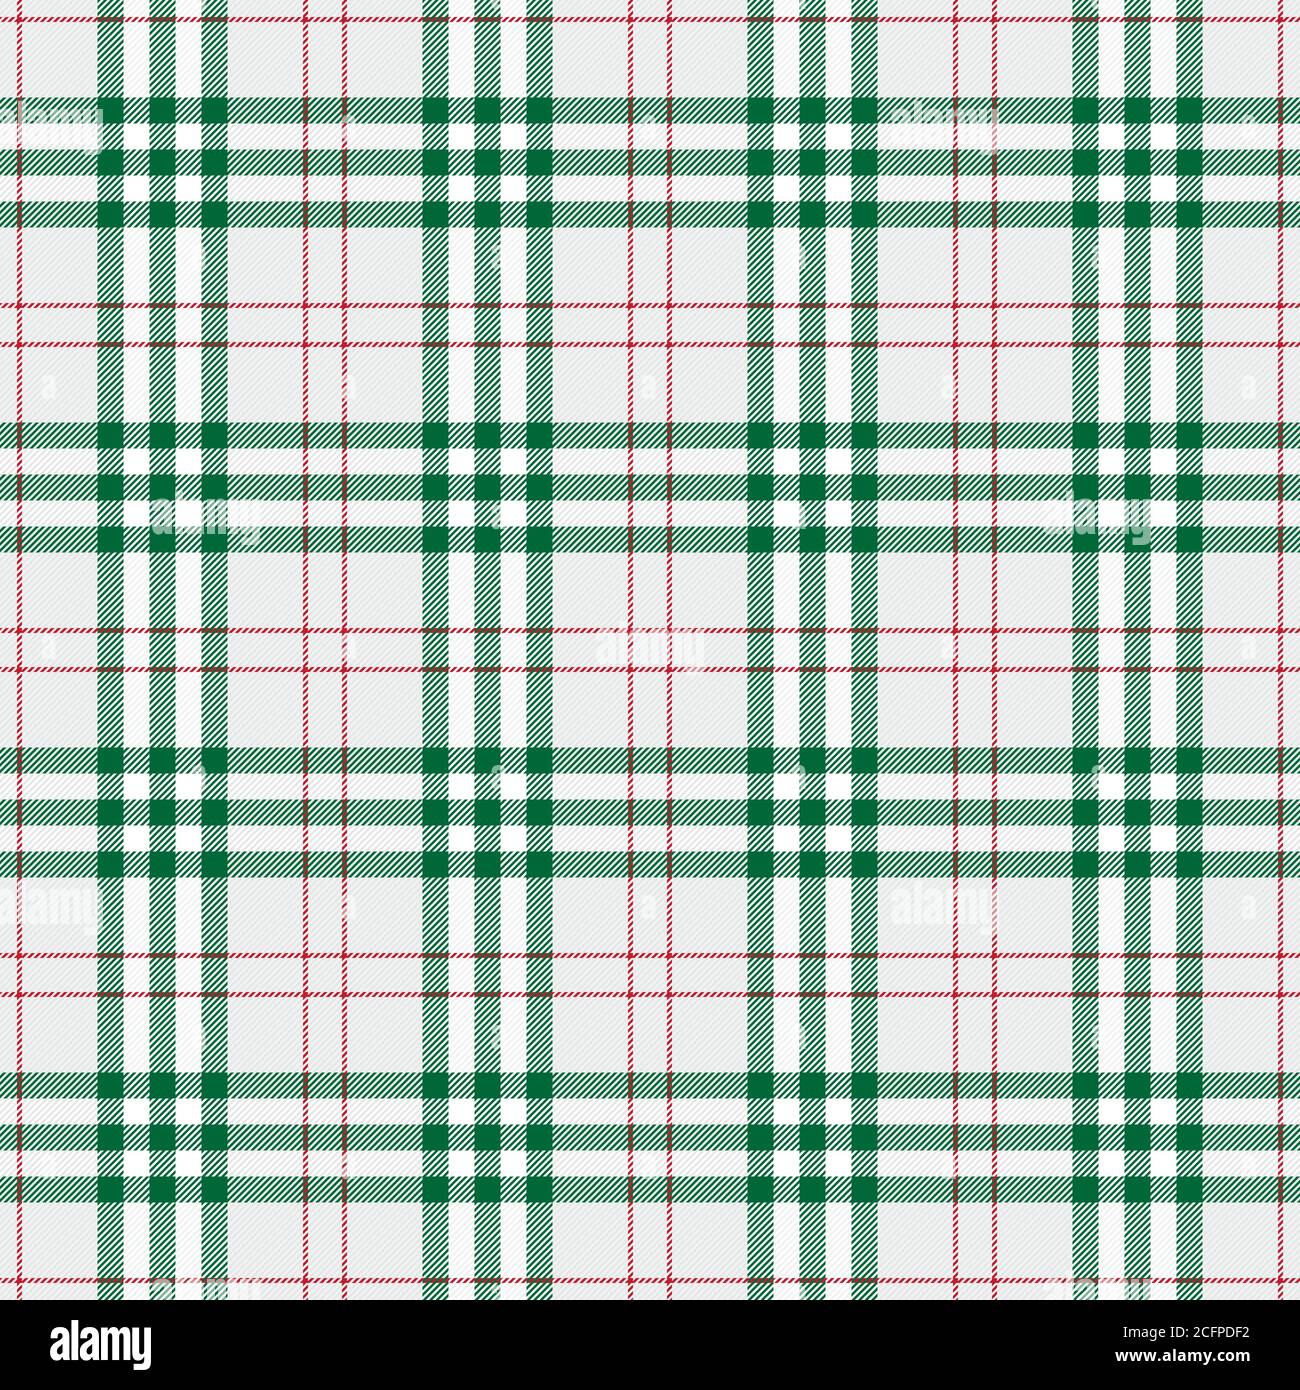 Classic tartan texture seamless pattern. Traditional Scottish checkered plaid ornament. Coloured geometric intersecting striped vector illustration. Stock Vector